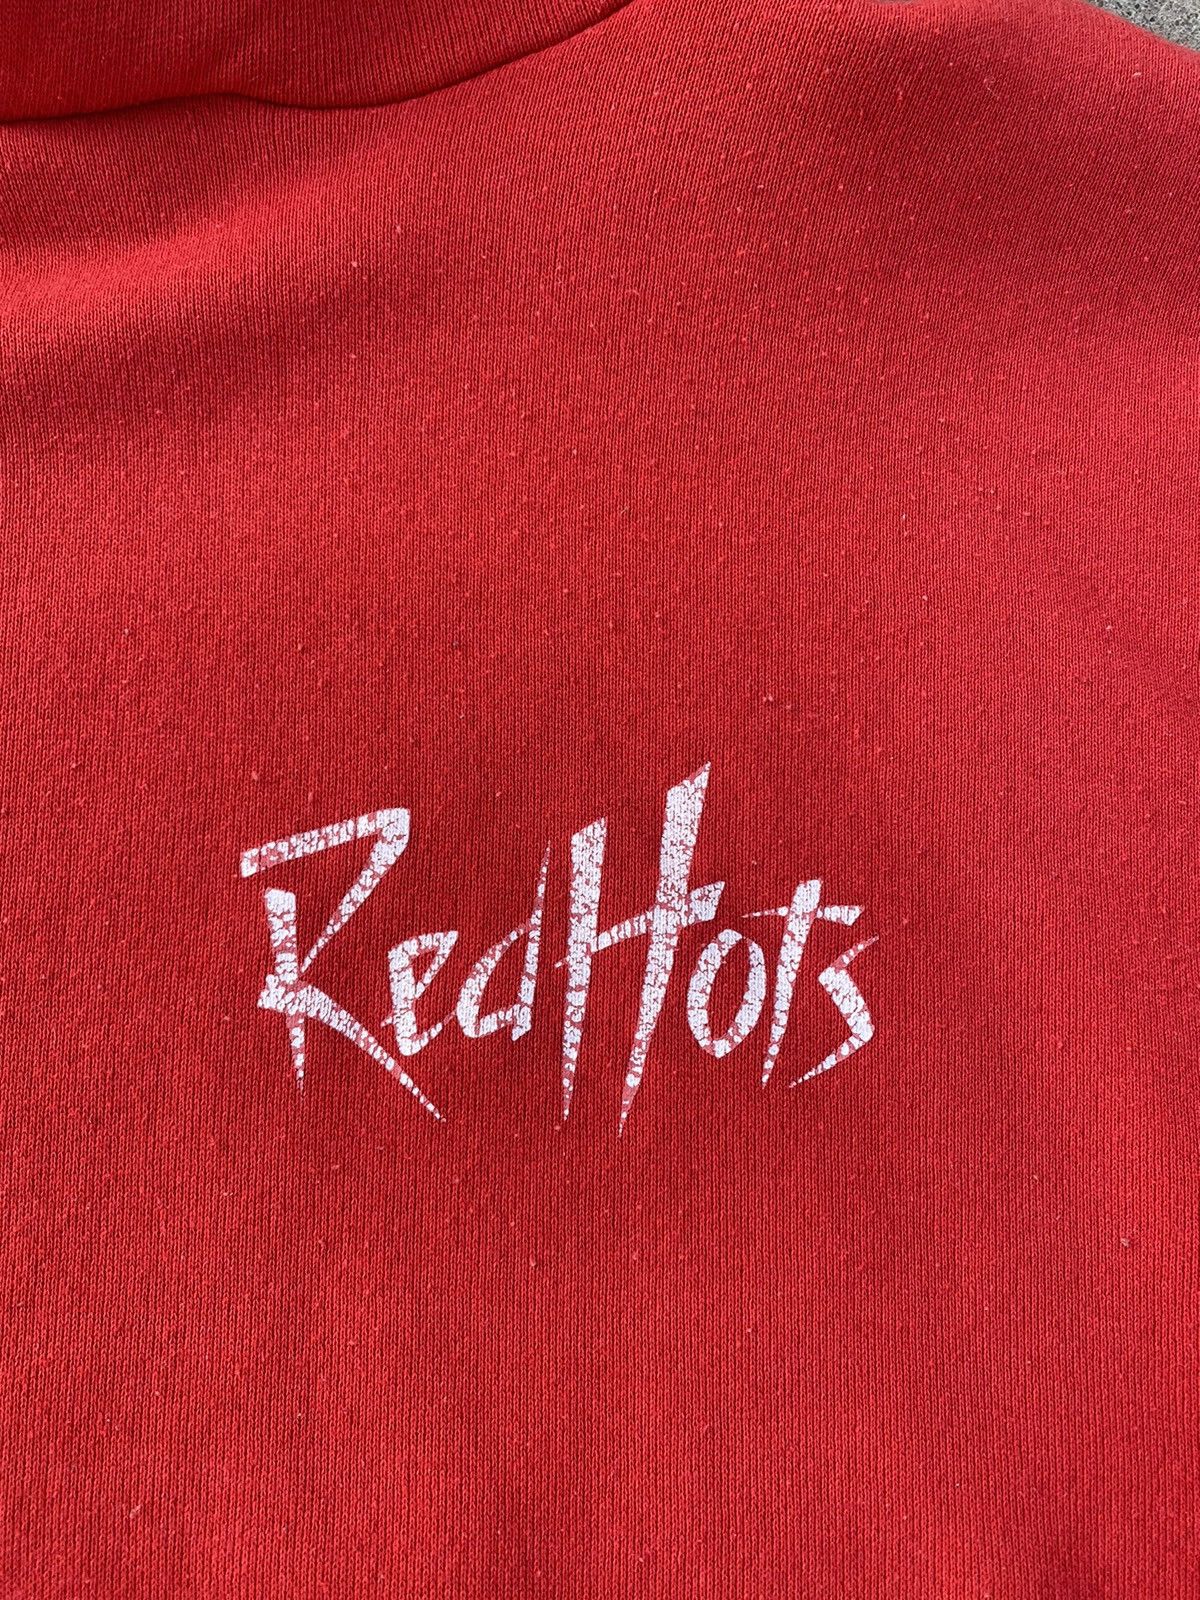 Vintage Vintage 90s Red Hots Russell Hoodie Size US L / EU 52-54 / 3 - 2 Preview